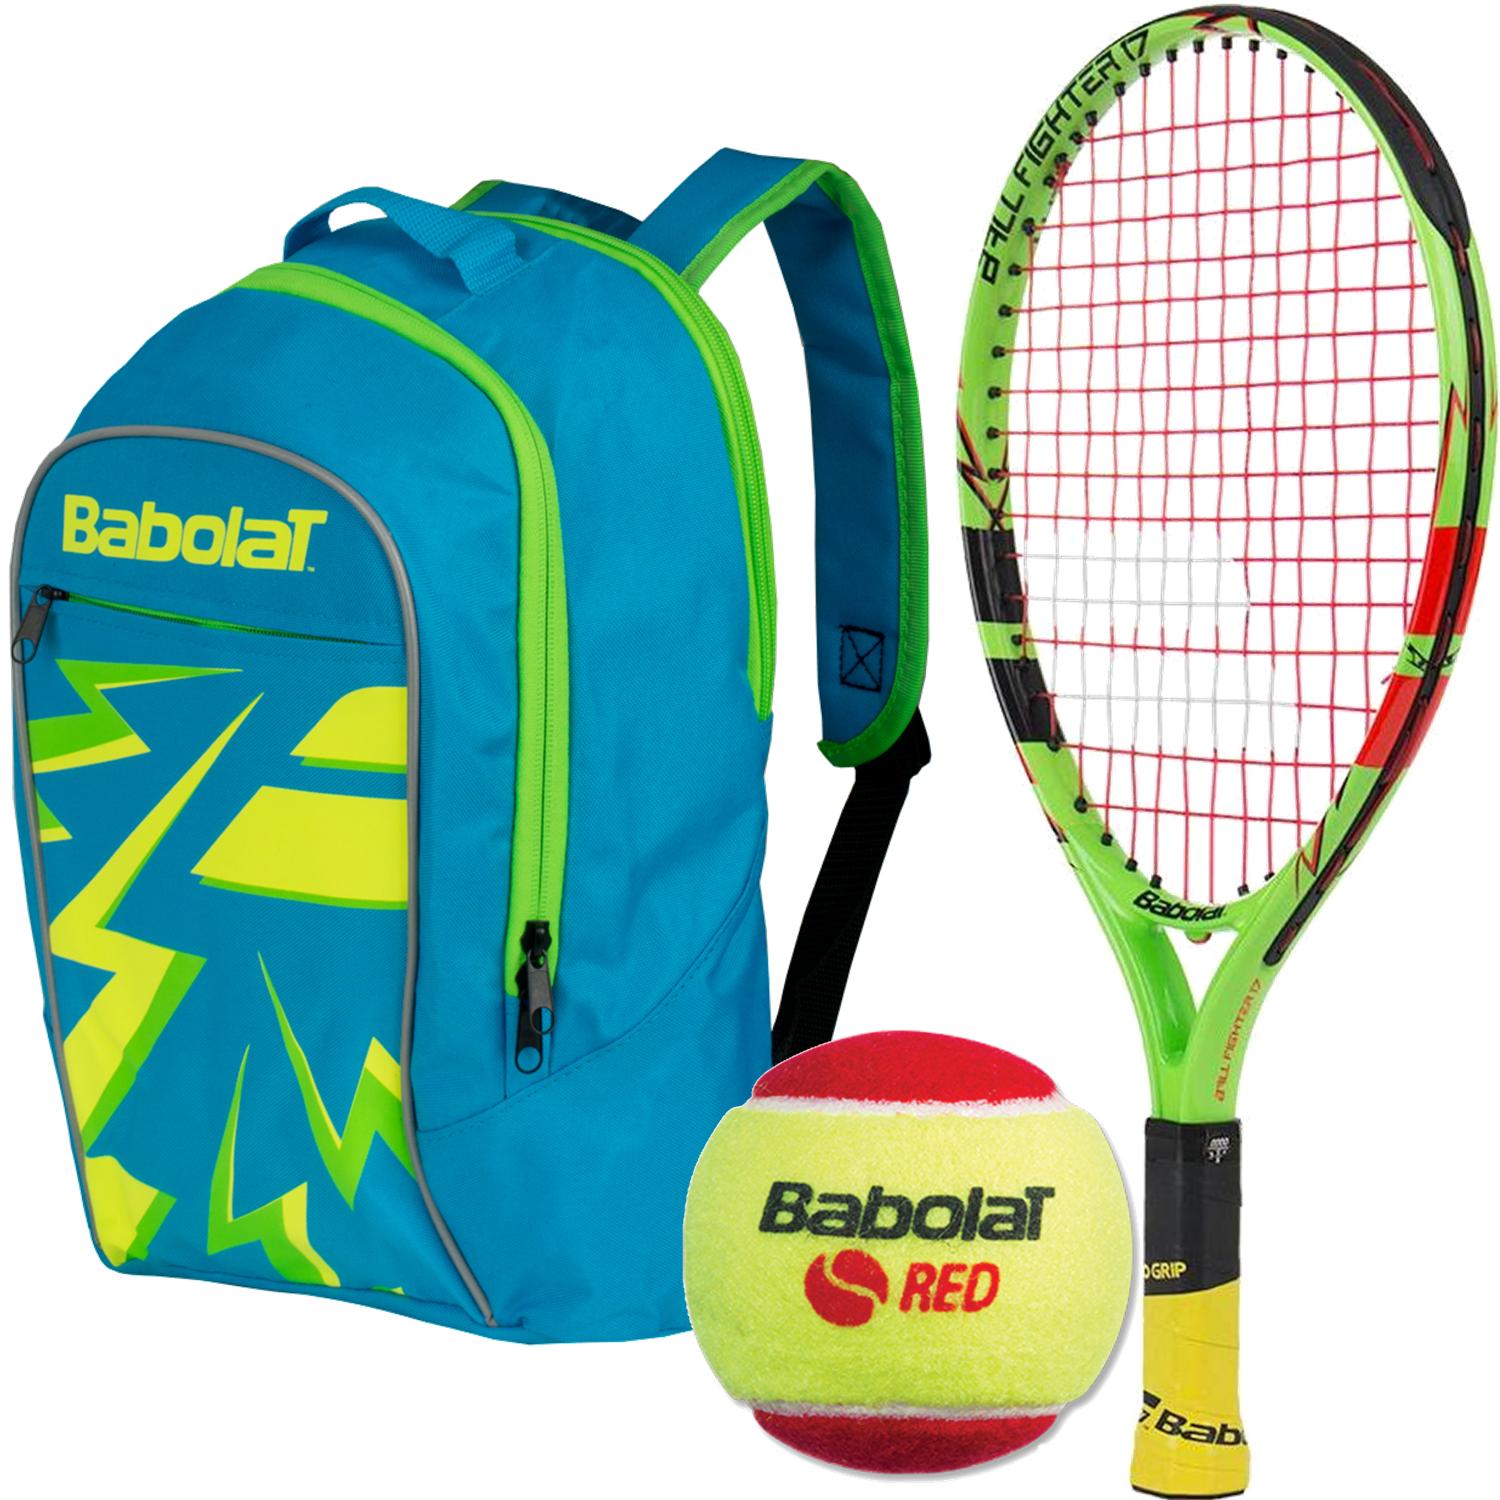 Babolat Ballfighter 17 Inch Child&amp;apos;s Tennis Racquet with Red Felt Tennis Balls a Blue or Purple Junior Backpack